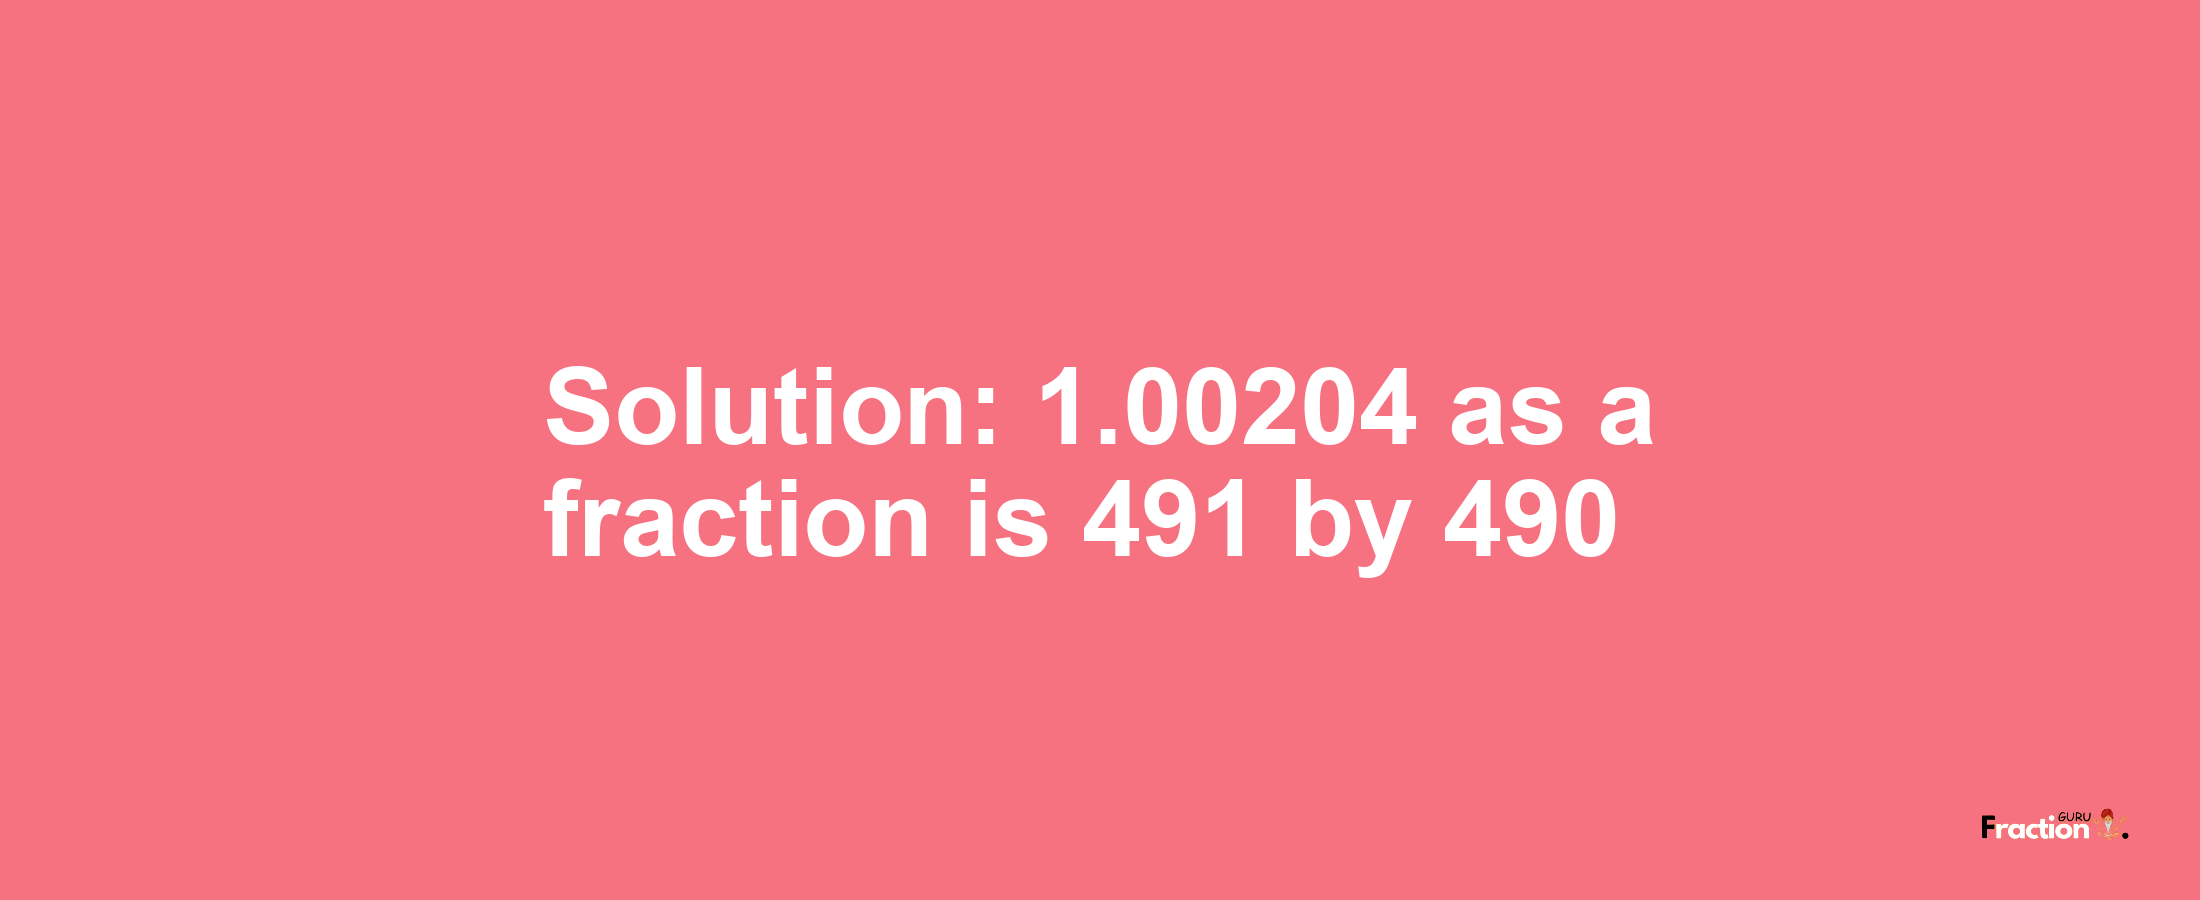 Solution:1.00204 as a fraction is 491/490